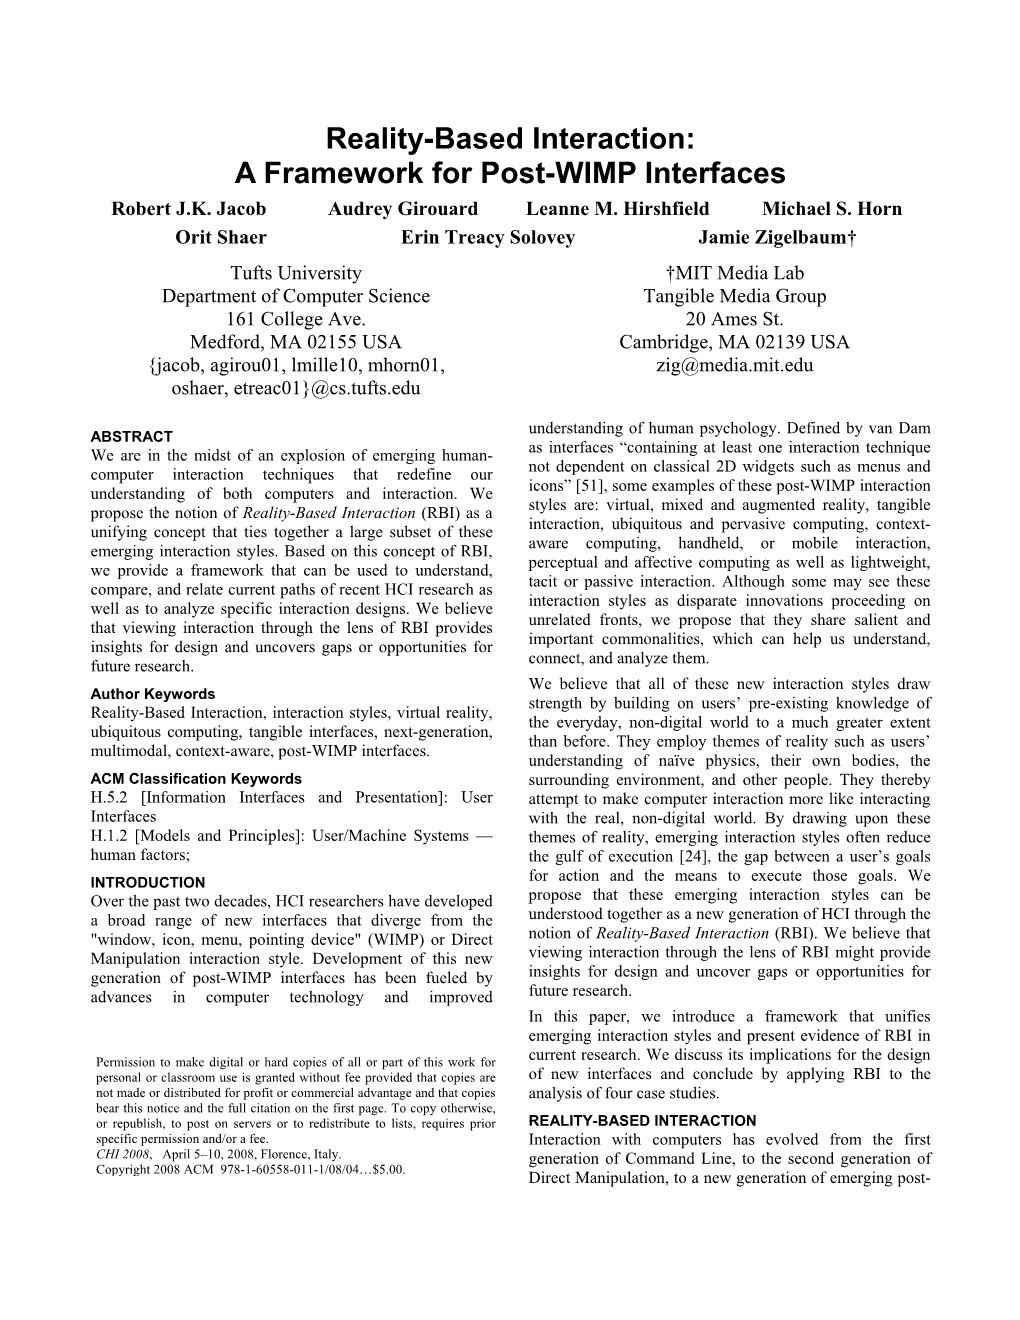 Reality-Based Interaction: a Framework for Post-WIMP Interfaces Robert J.K